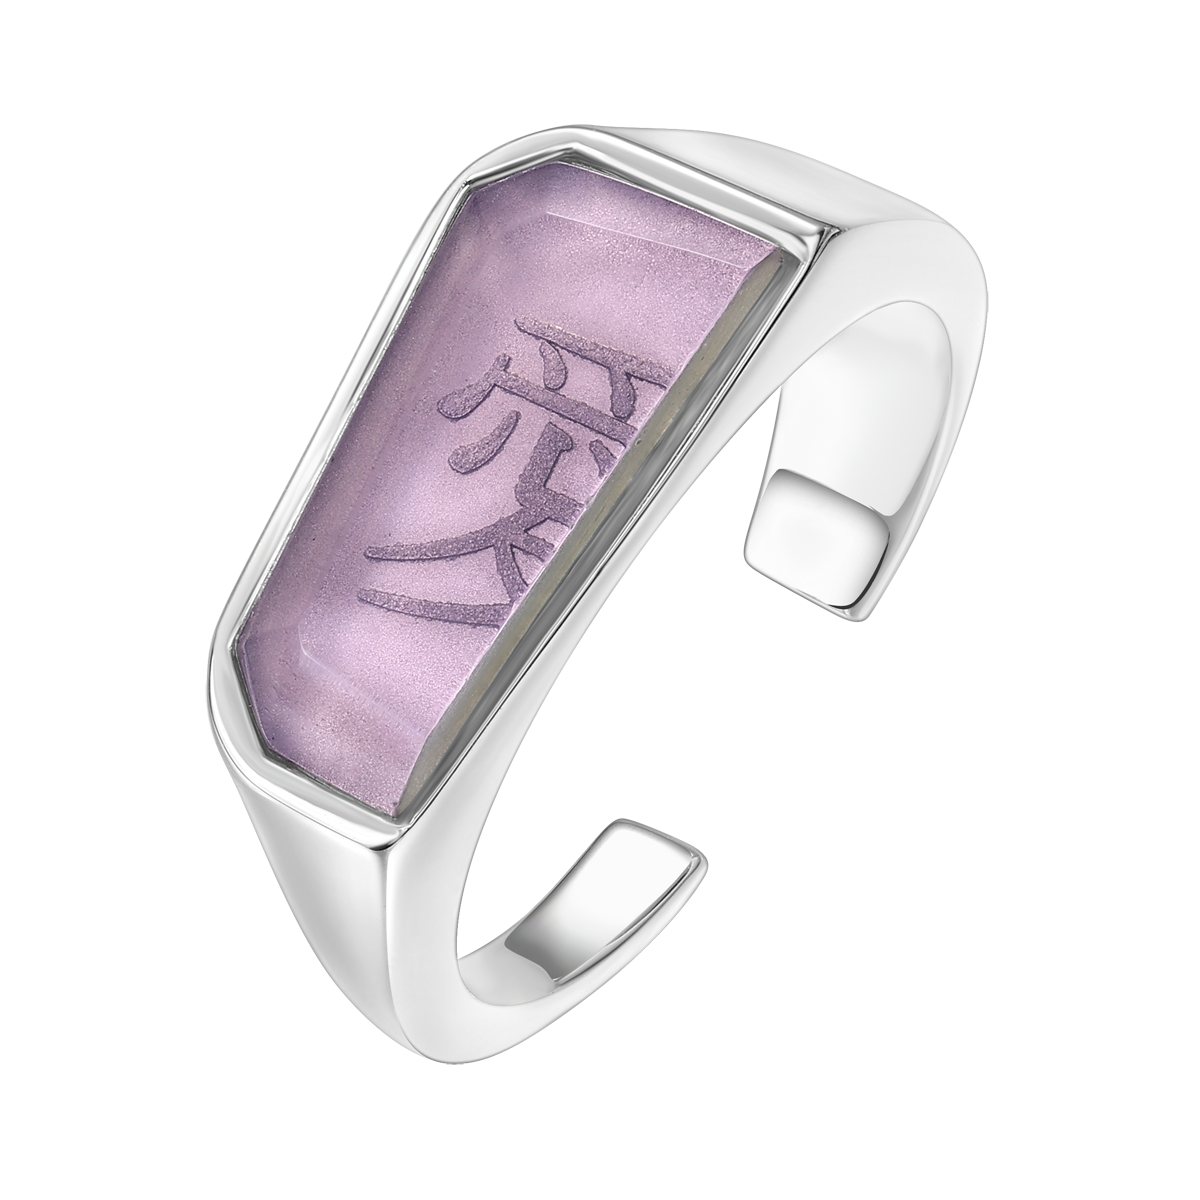 LO VE - Cutted Signet Ring